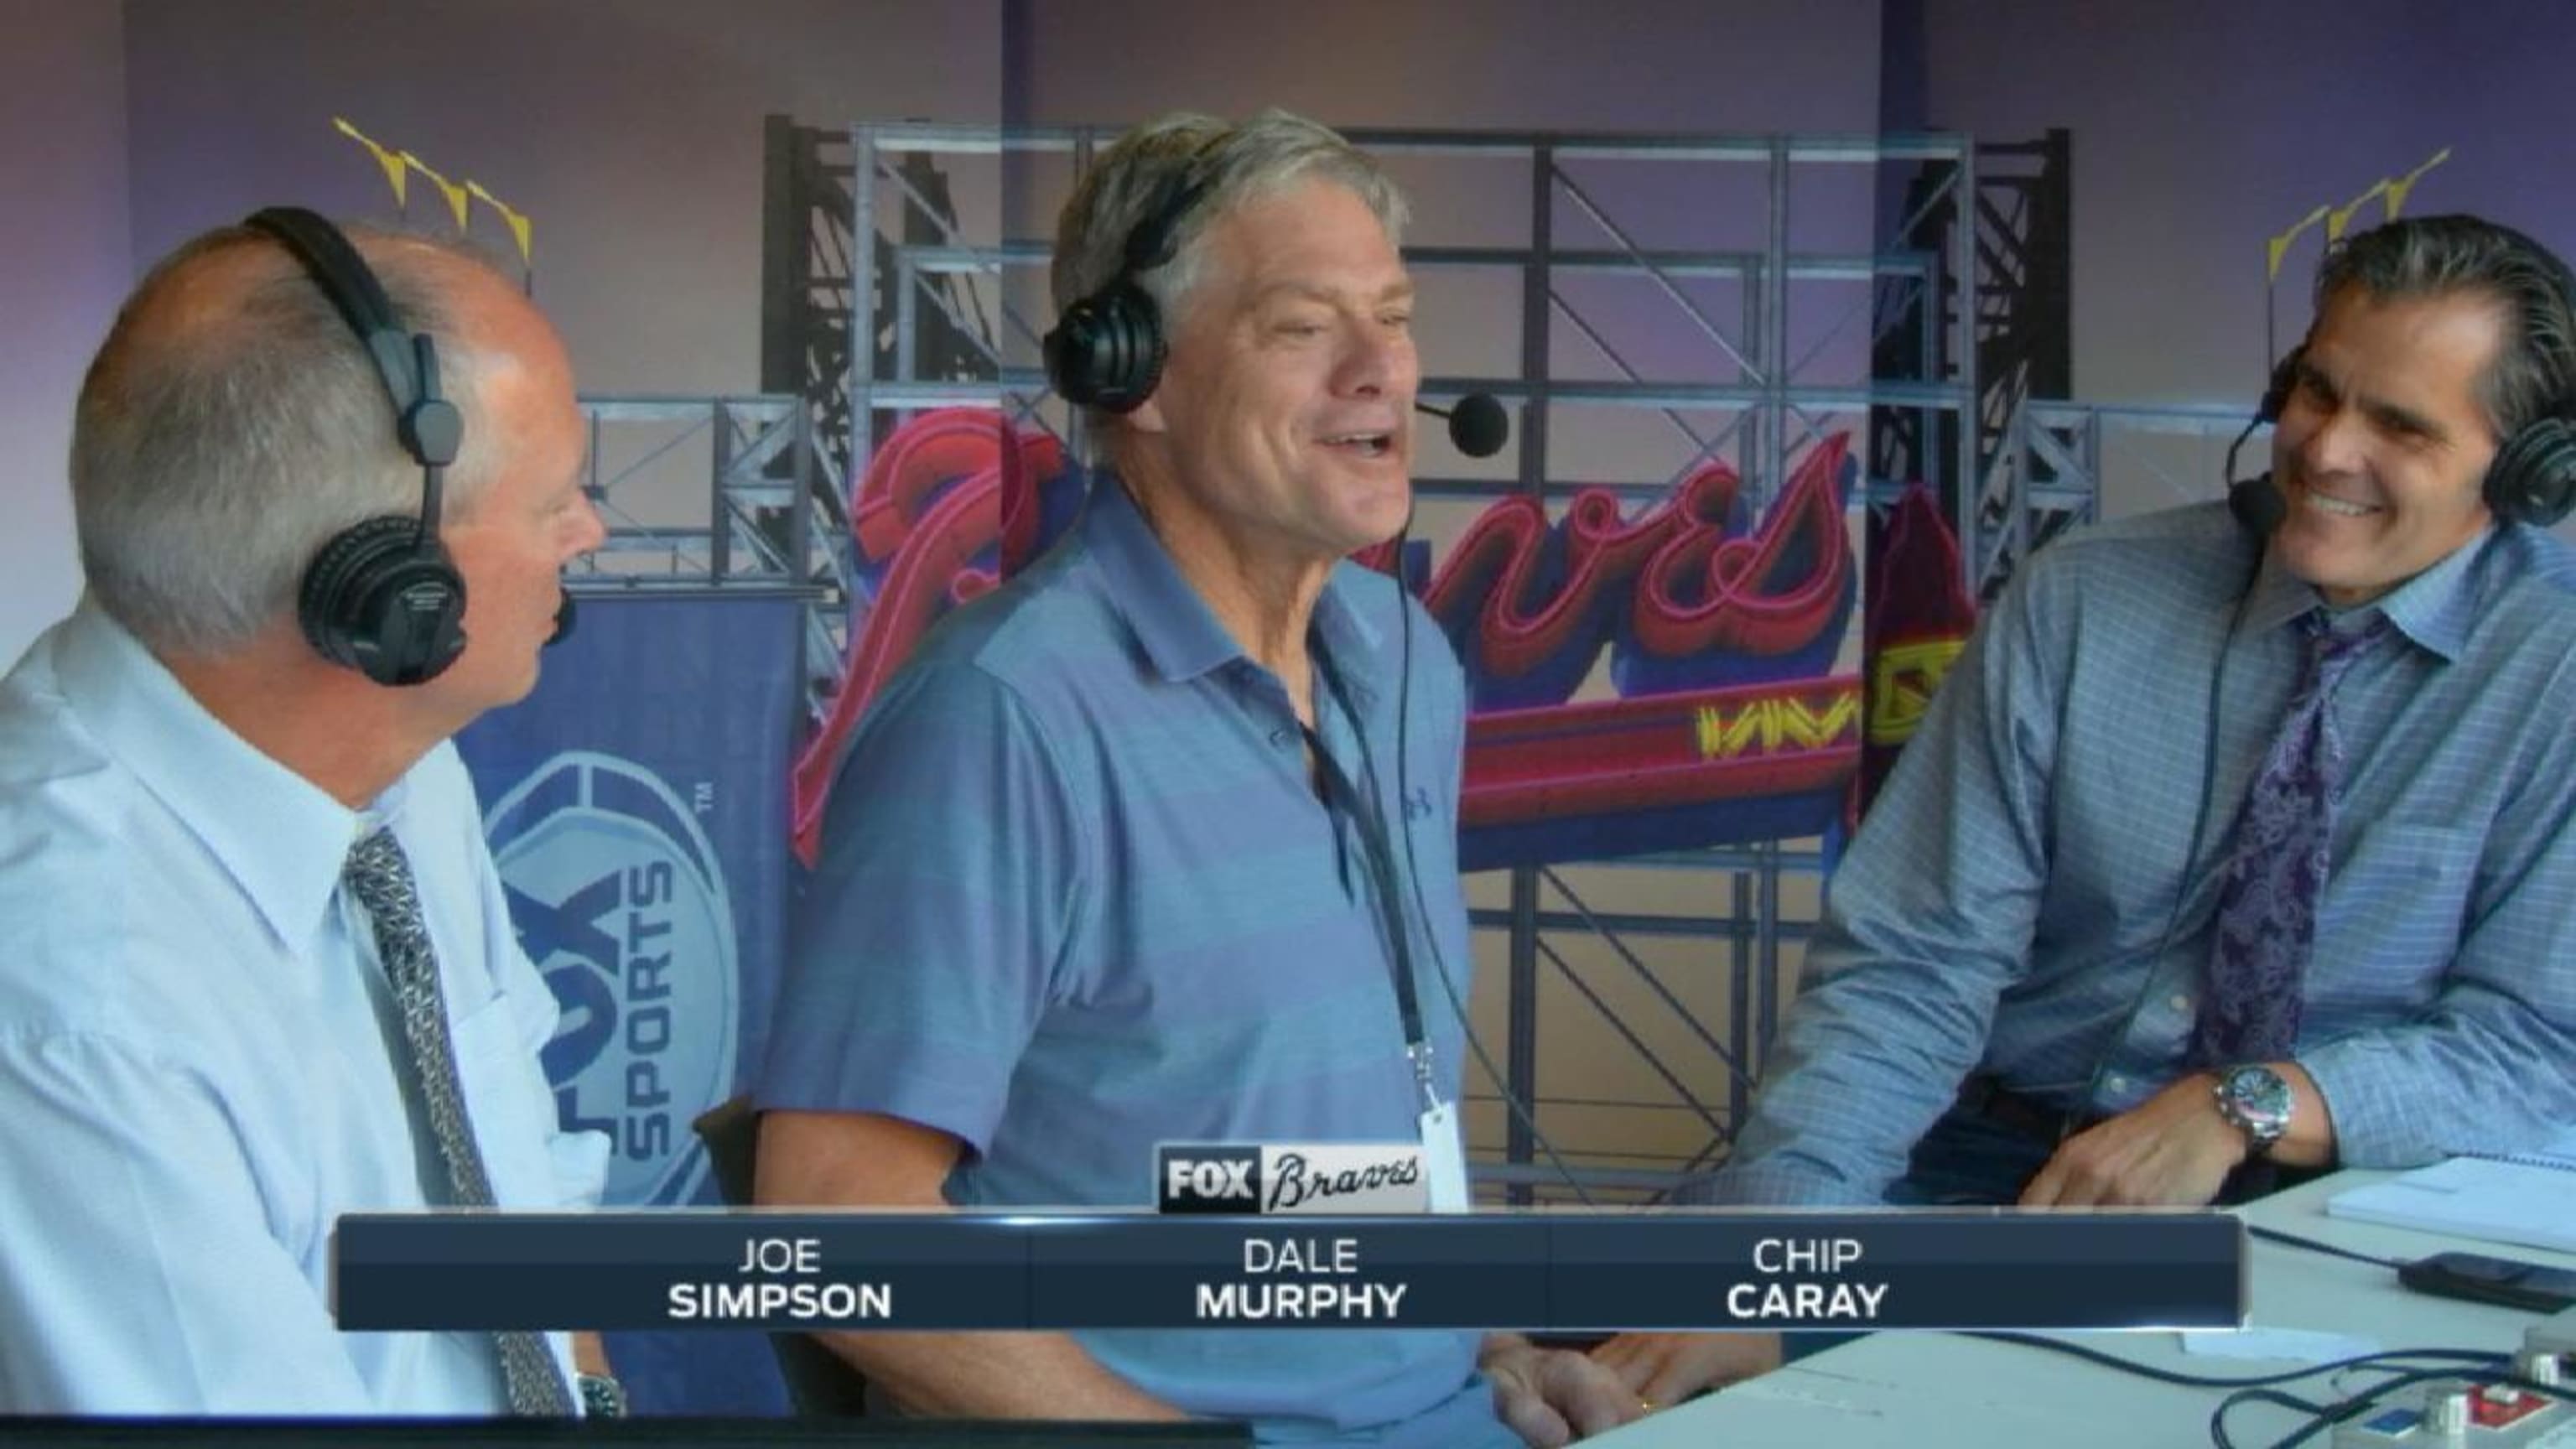 MLB: With help of his family, Dale Murphy gets final Hall-of-Fame